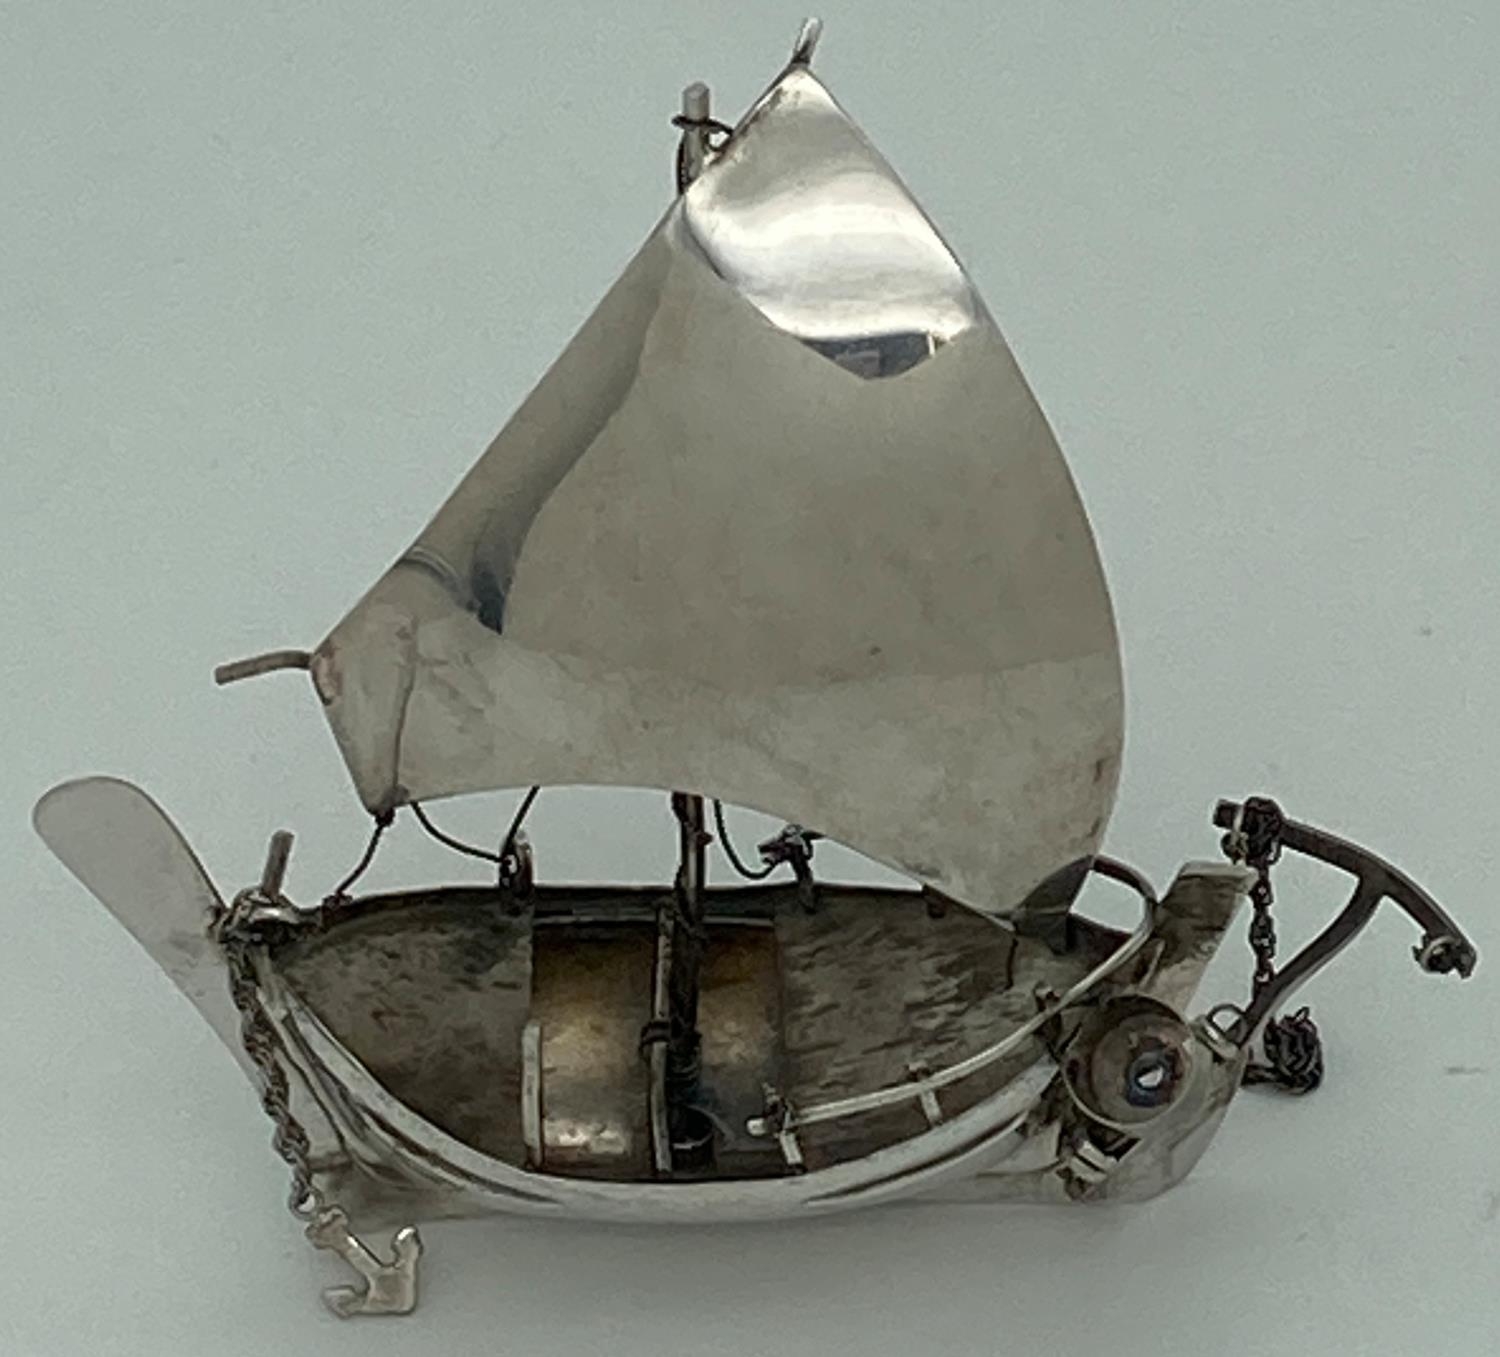 A vintage silver miniature sailing boat figurine with rudder, anchor and bailing bucket. Marked